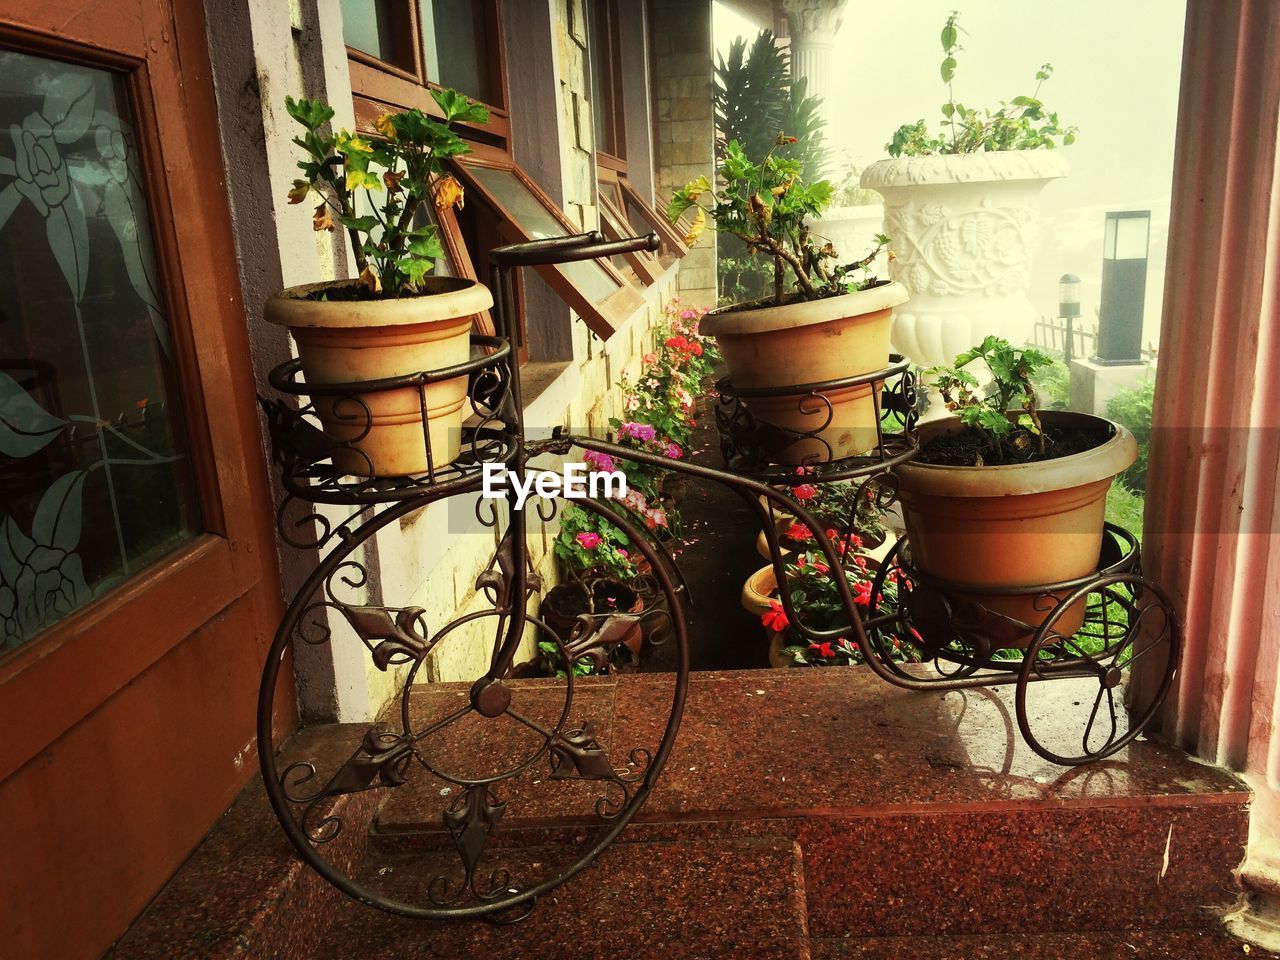 Potted plants in artificial bicycle baskets outside house